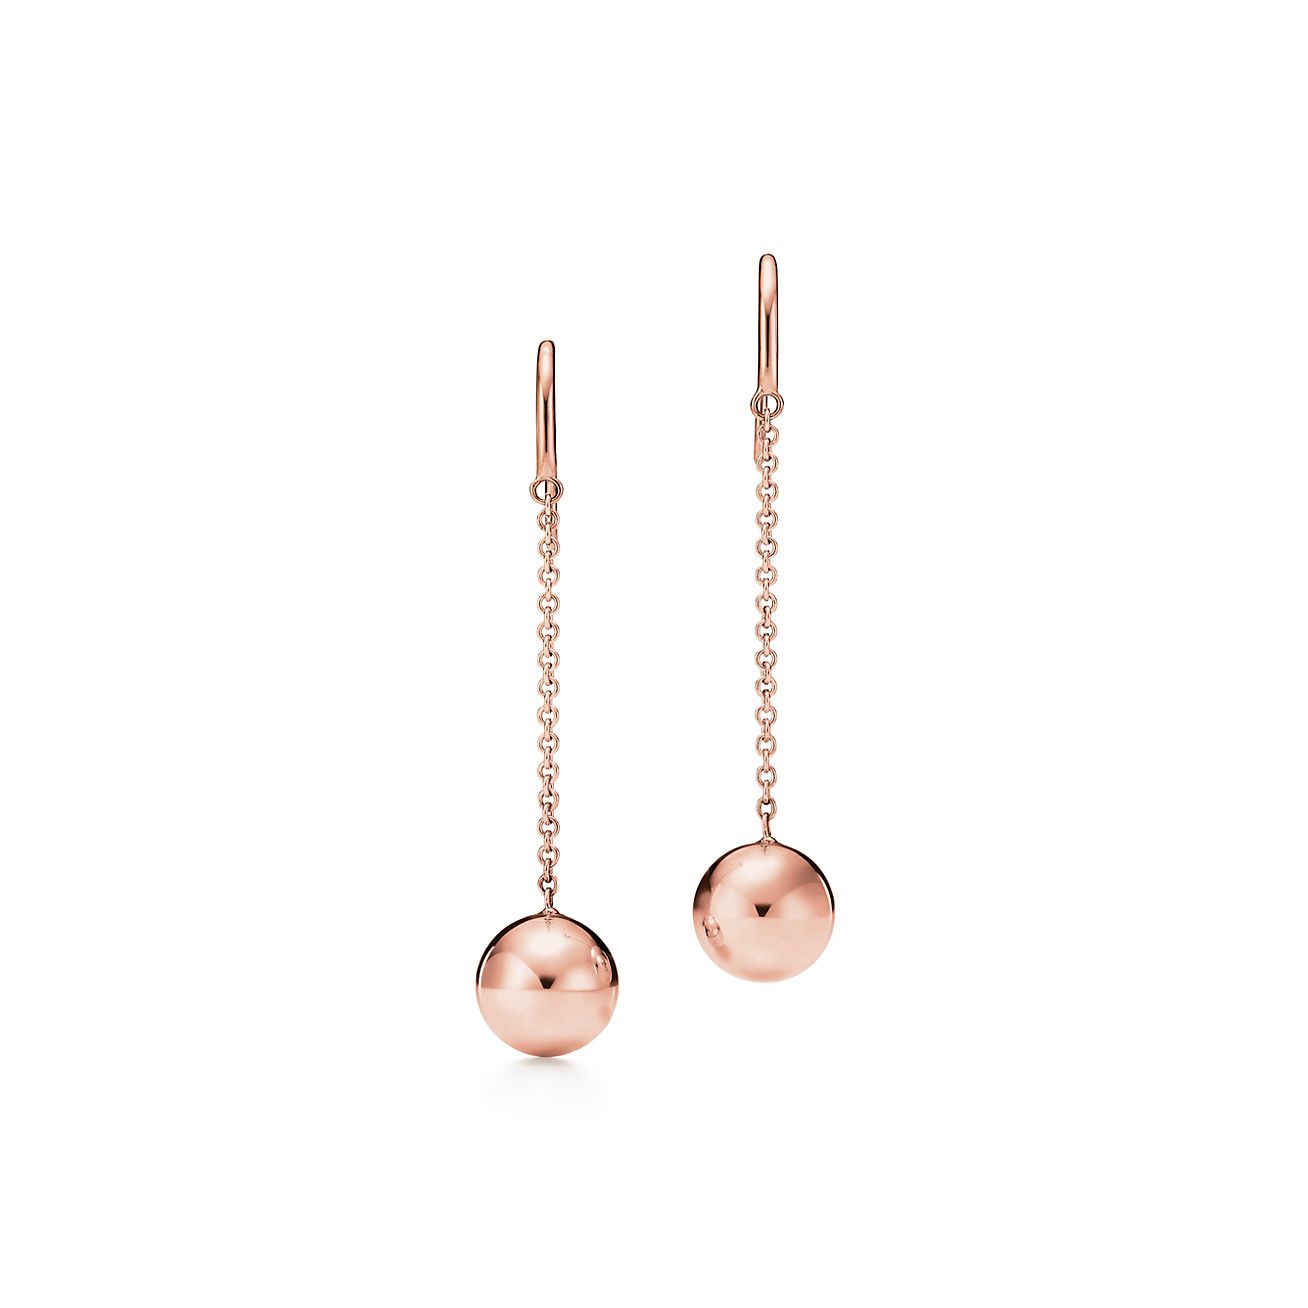 Simple earrings with rose gold finish - NATIF